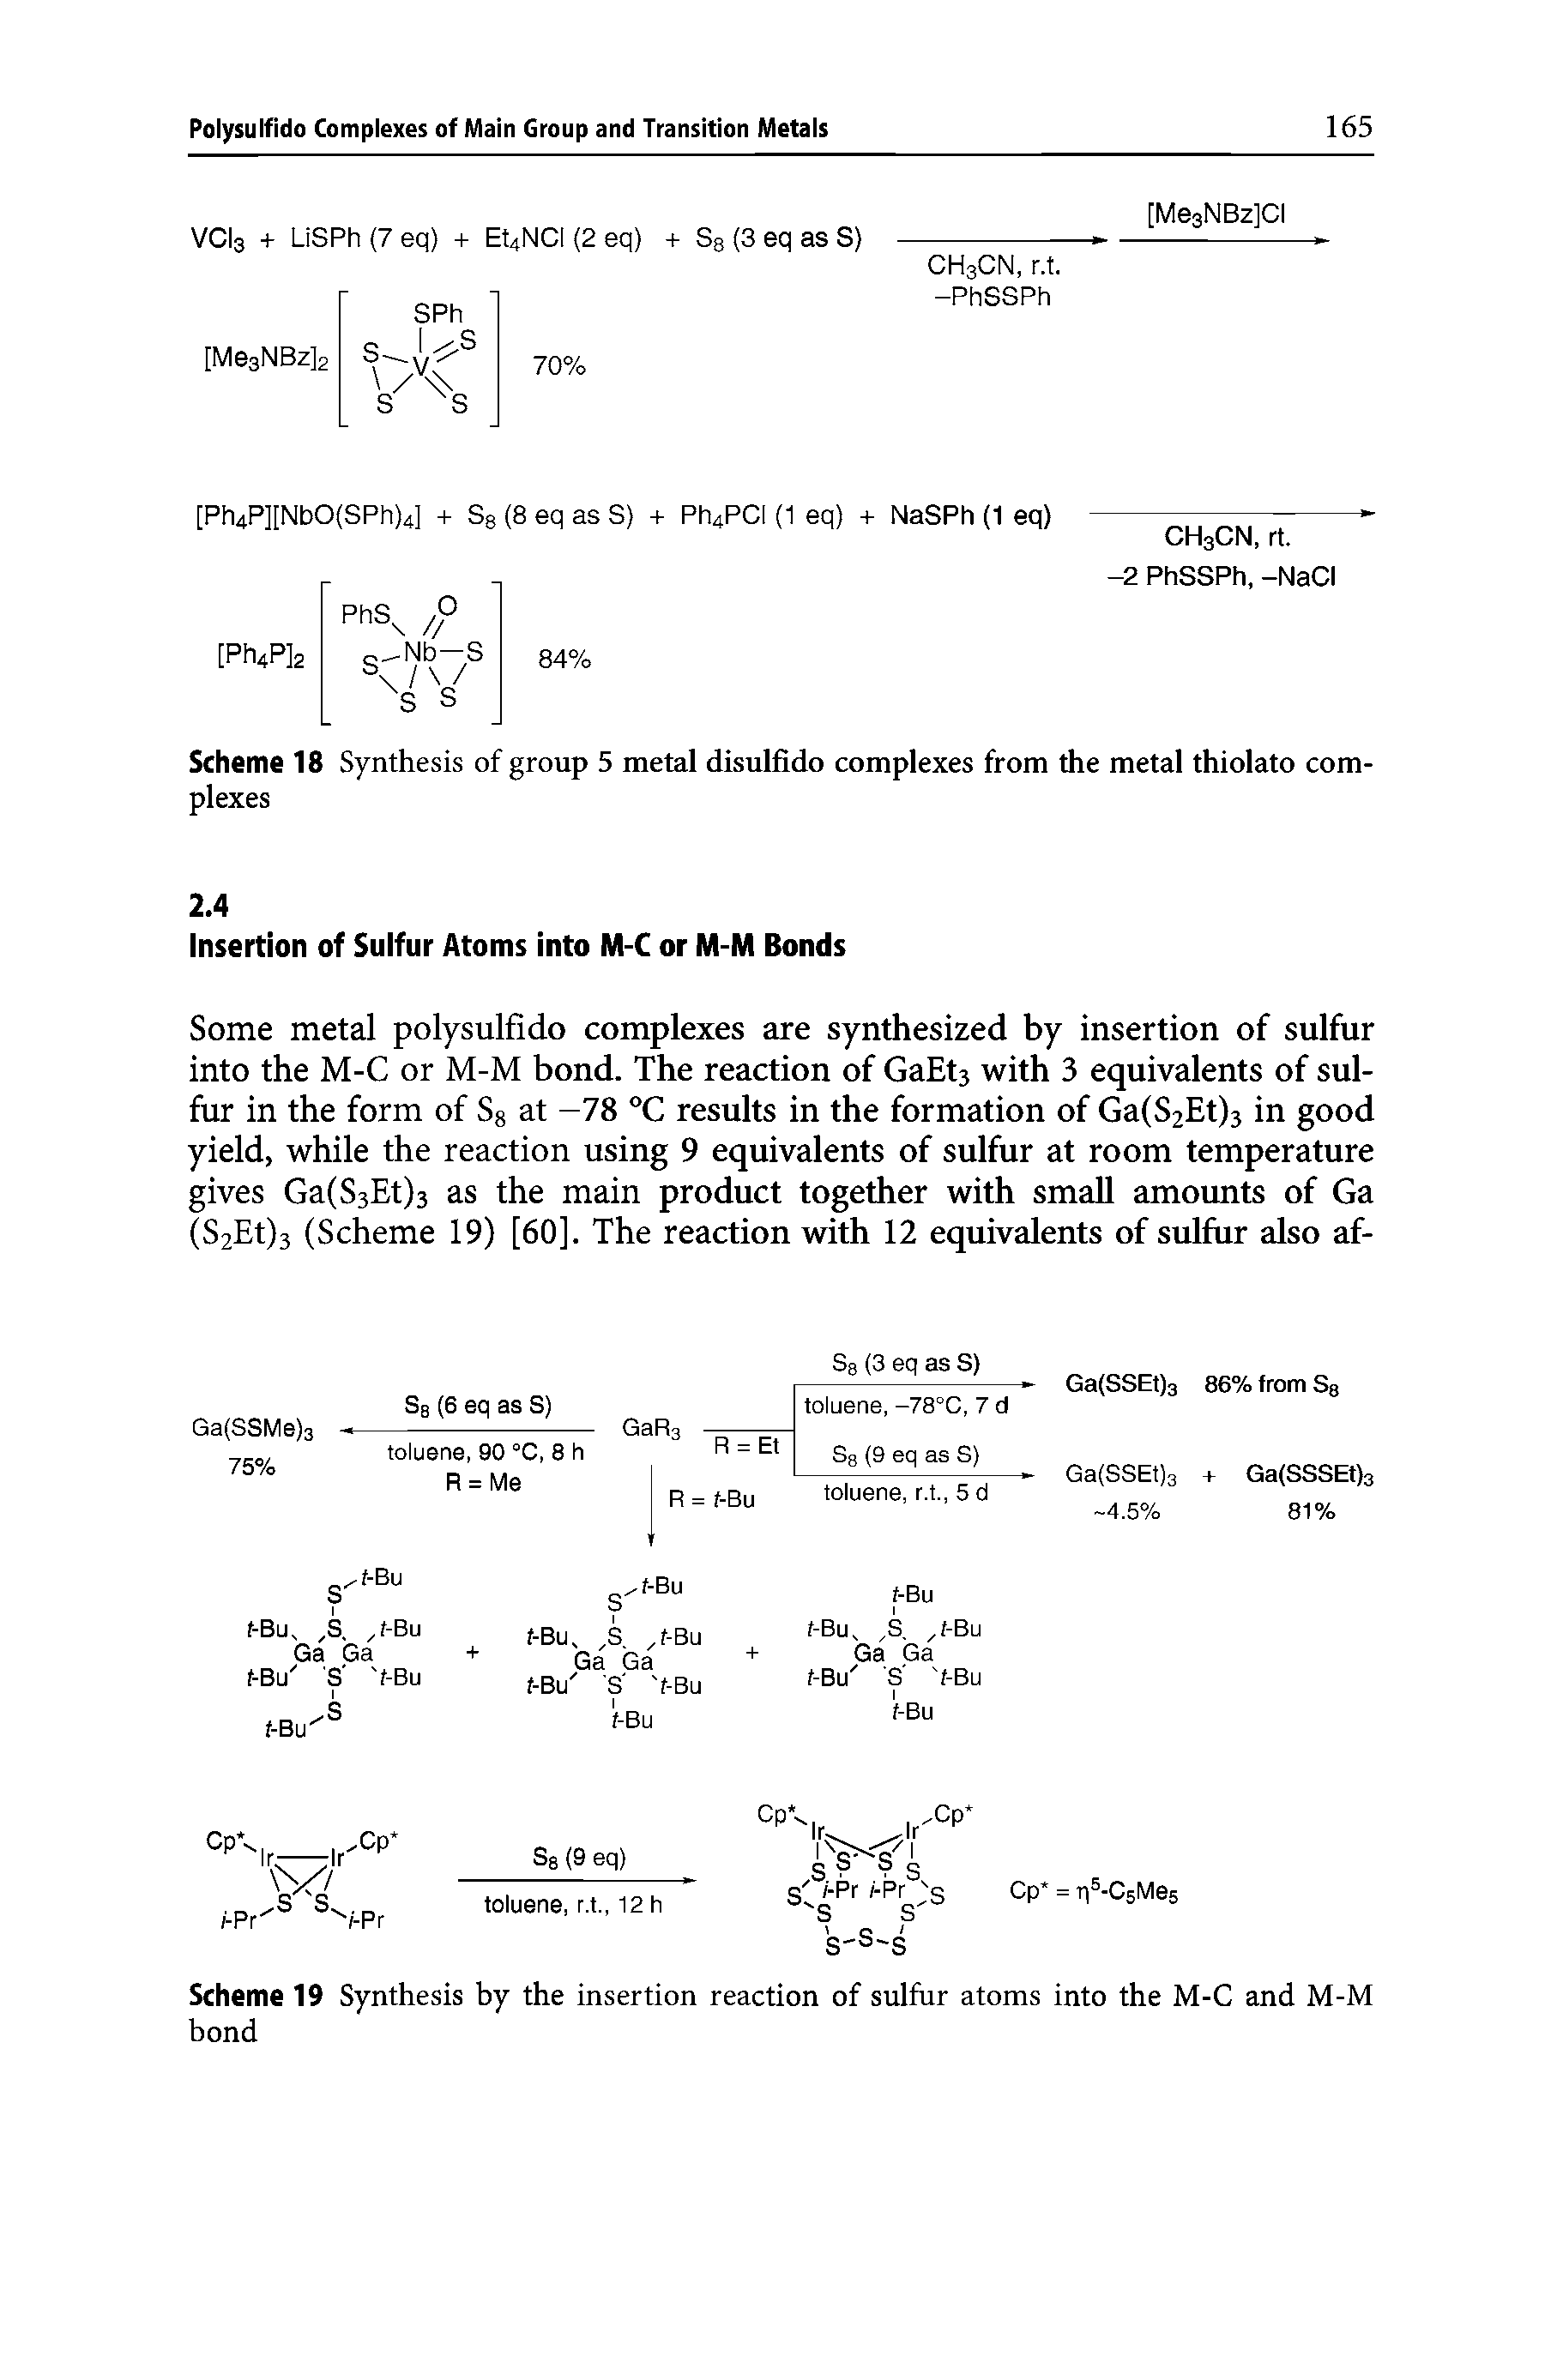 Scheme 19 Synthesis by the insertion reaction of sulfur atoms into the M-C and M-M bond...